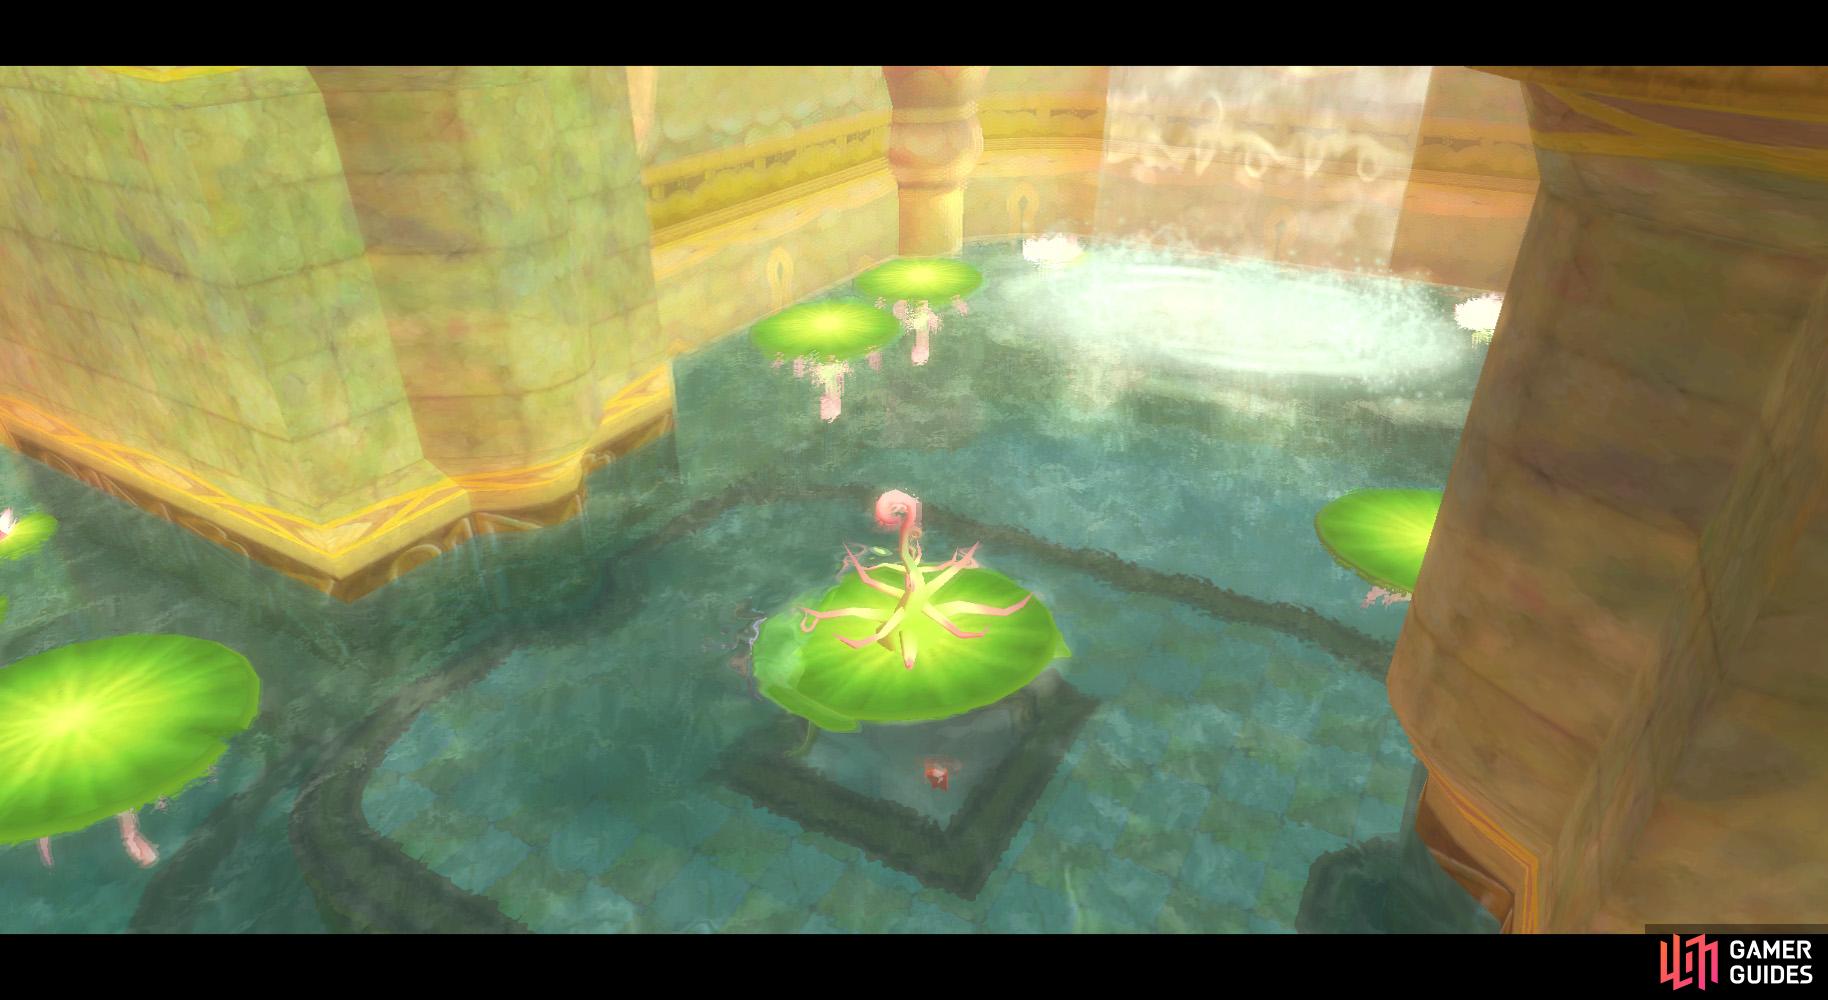 Jump onto this lilypad to flip it over, then swim through the tunnel under it.